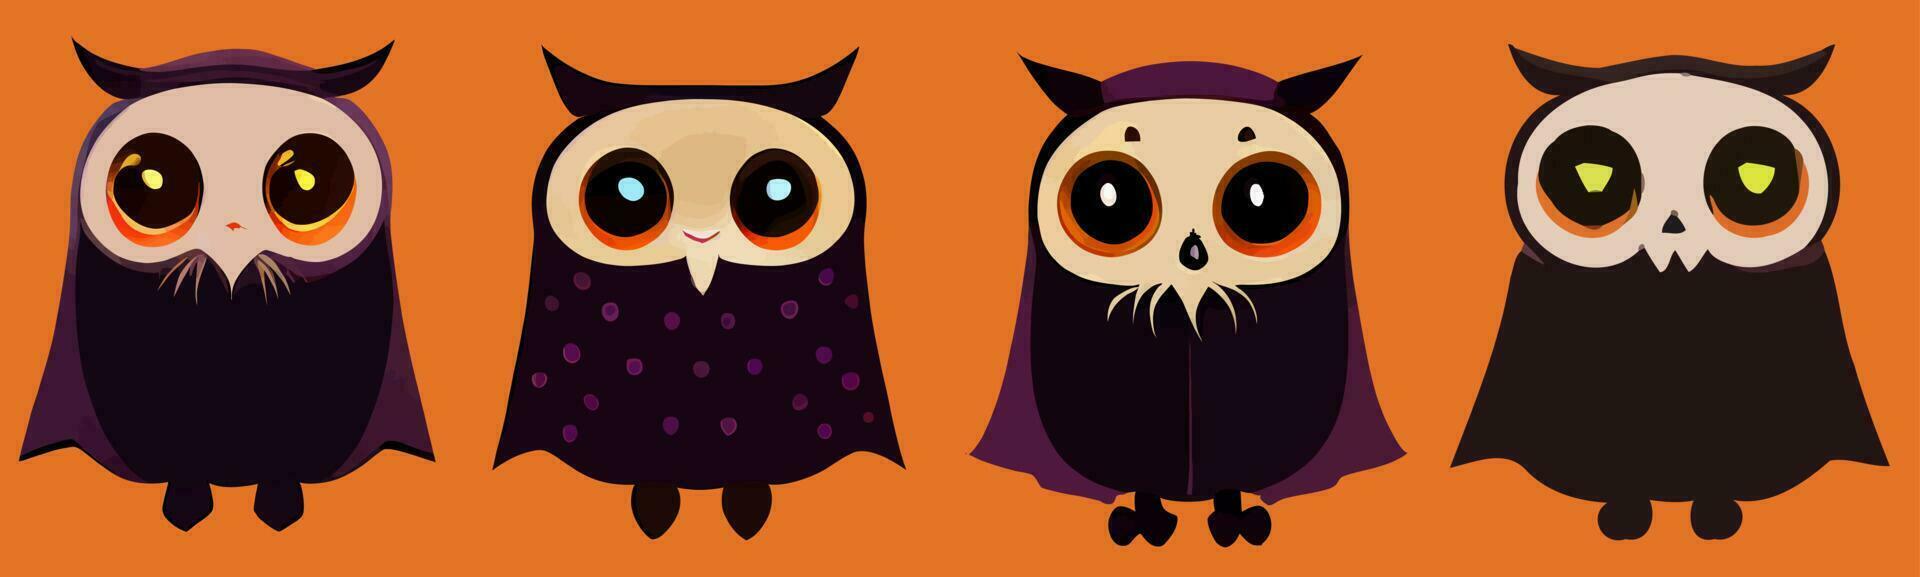 illustration vector clipart set of owl using Halloween costume isolated on orange perfect for icon, mascot, or edit your customize design or website